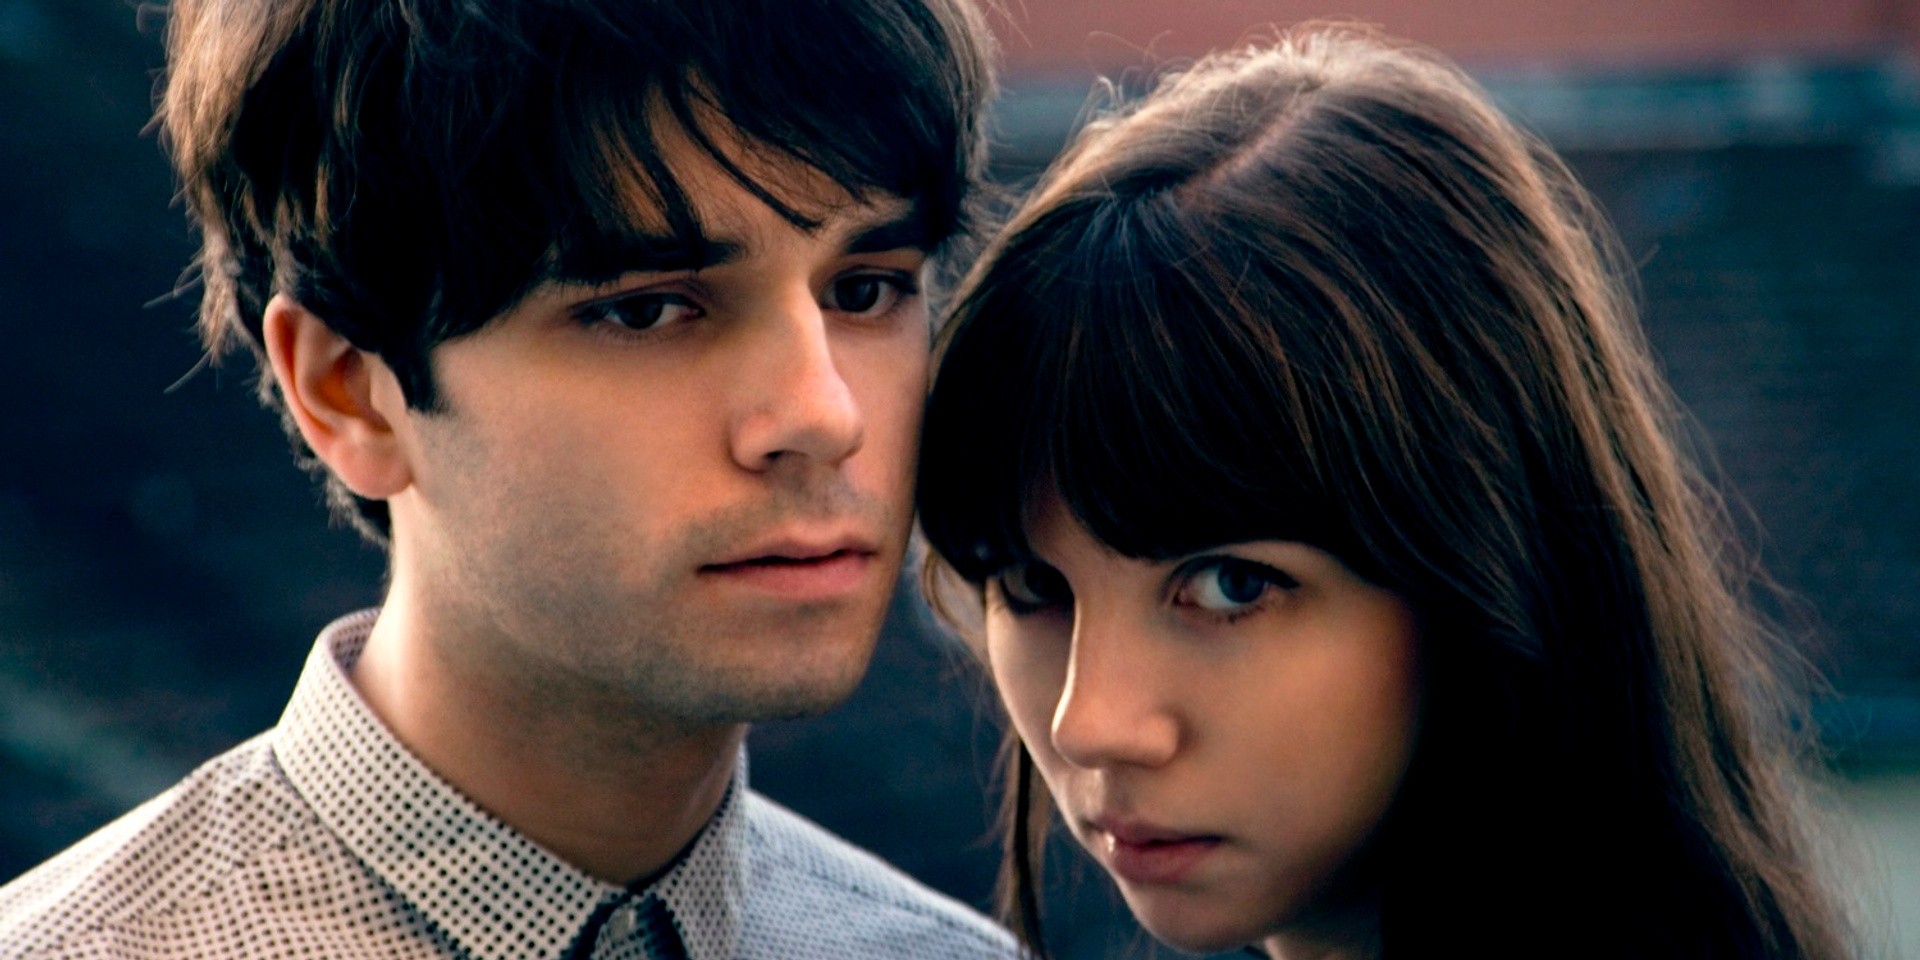 Mysterious darkwave duo The KVB to perform in Singapore